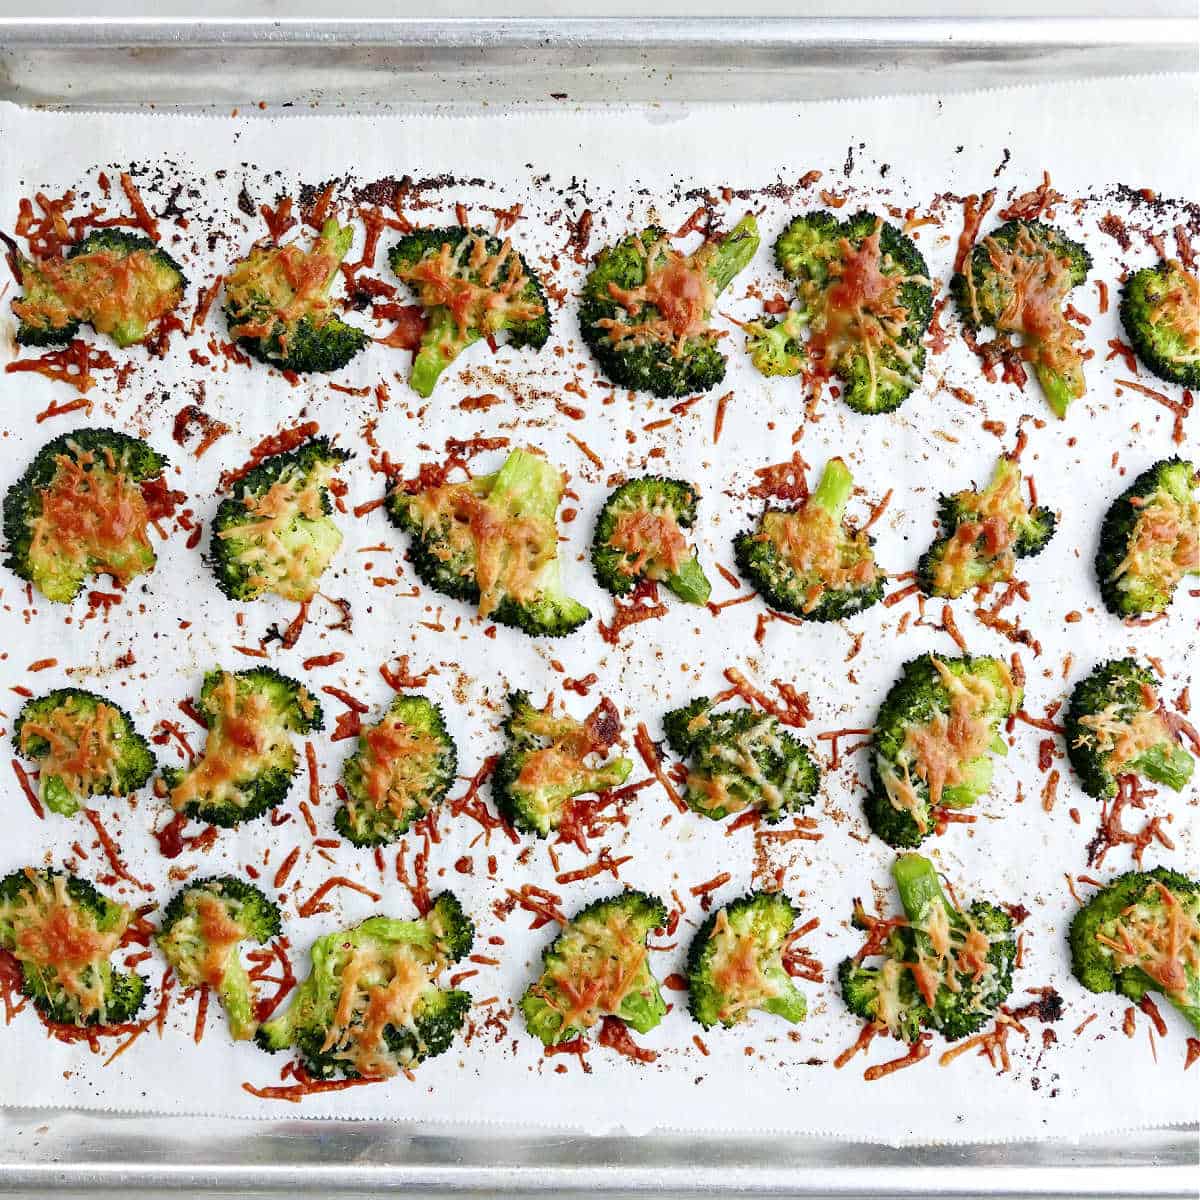 crispy broccoli chips with cheese on a baking sheet after being baked